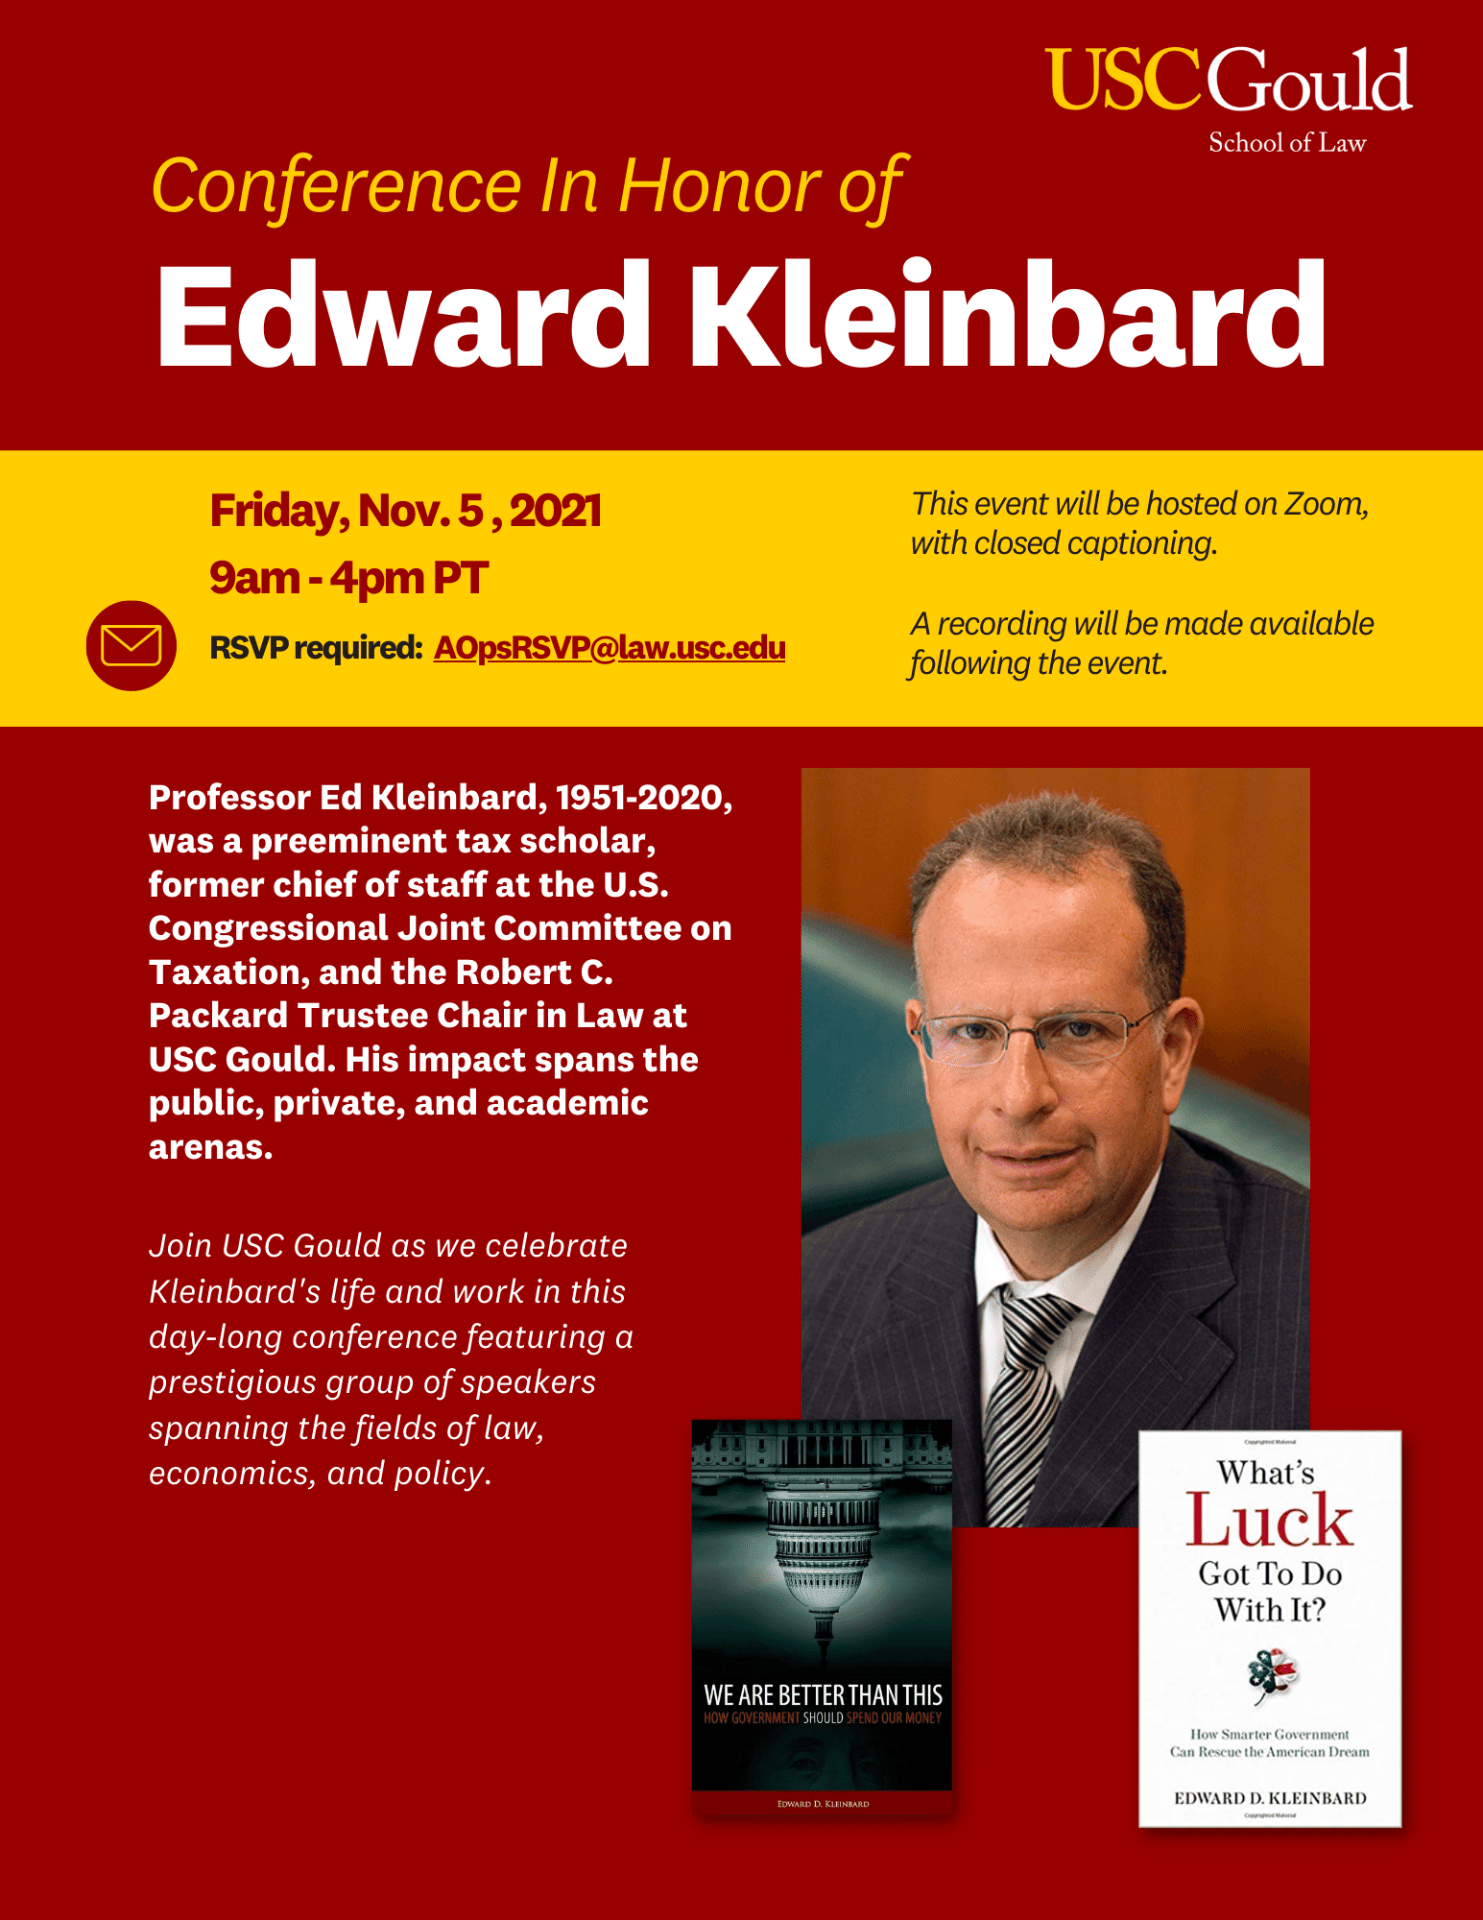 Flyer about Conference in Honor of Edward Kleinbard